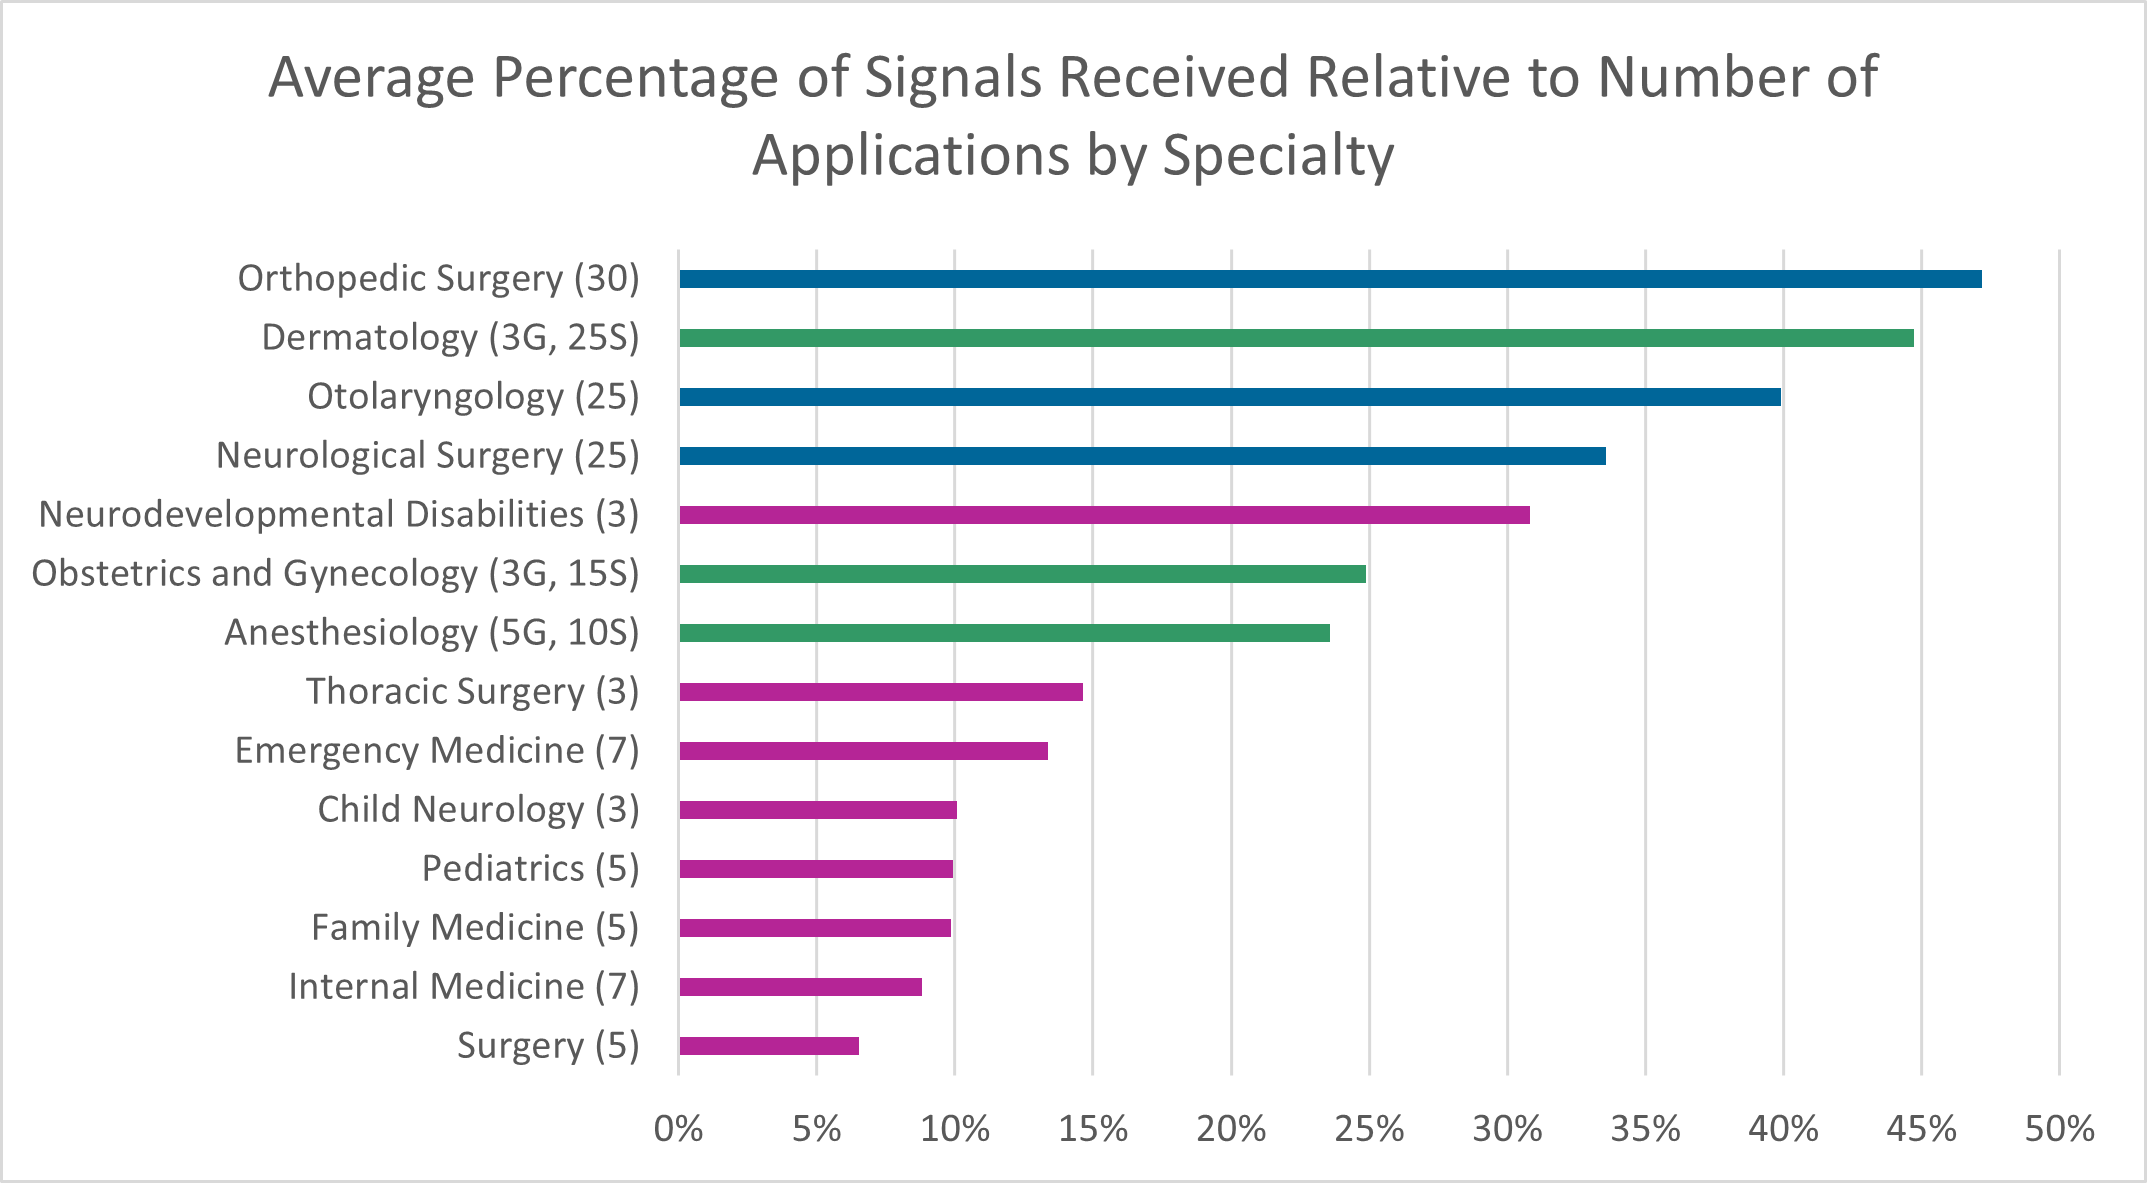 Bar chart illustrating the average percentage of signals received relative to the number of applications by specialty. The specialties and their corresponding average percentages are as follows: Surgery (7%), Internal Medicine (9%), Family Medicine (10%), Pediatrics ( 10%), Child Neurology (10%), Emergency Medicine (13%), Thoracic Surgery (15%), Anesthesiology (24%), Obstetrics and Gynecology (25%), Neurodevelopmental Disabilities (31%), Neurological Surgery (34%), Otolaryngology (40%), Dermatology (45%), Orthopedic Surgery (47%).